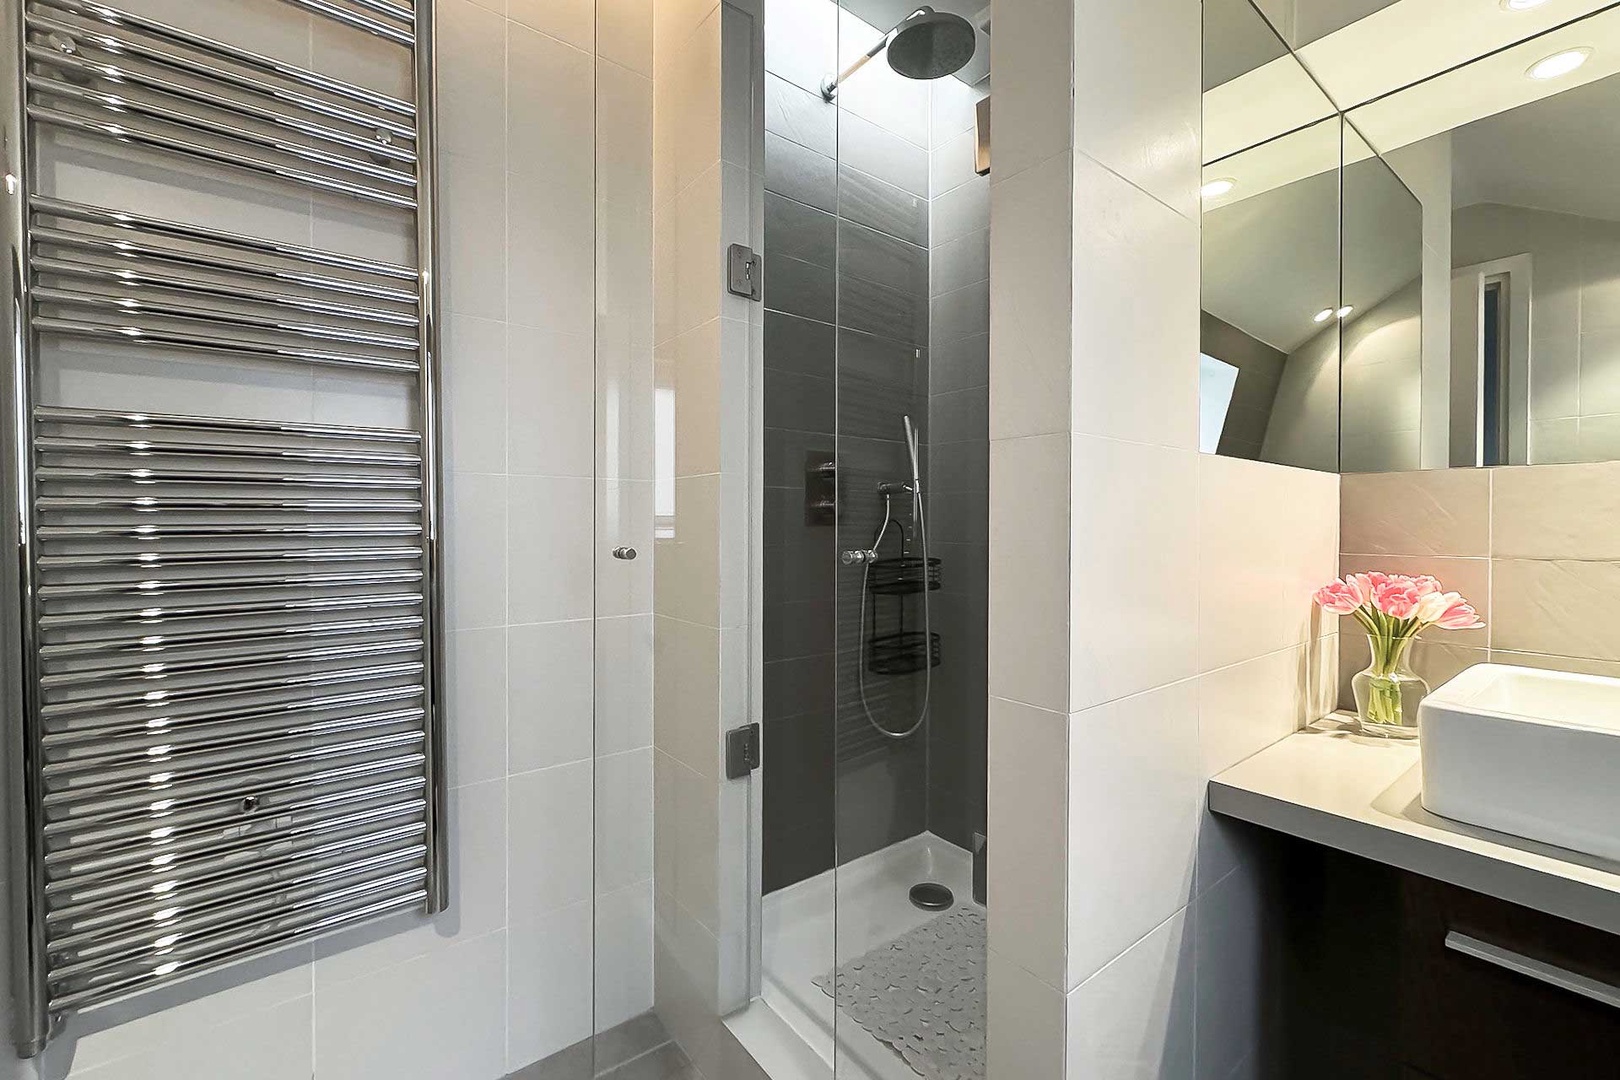 Enjoy modern amenities and finishes in the bathroom.